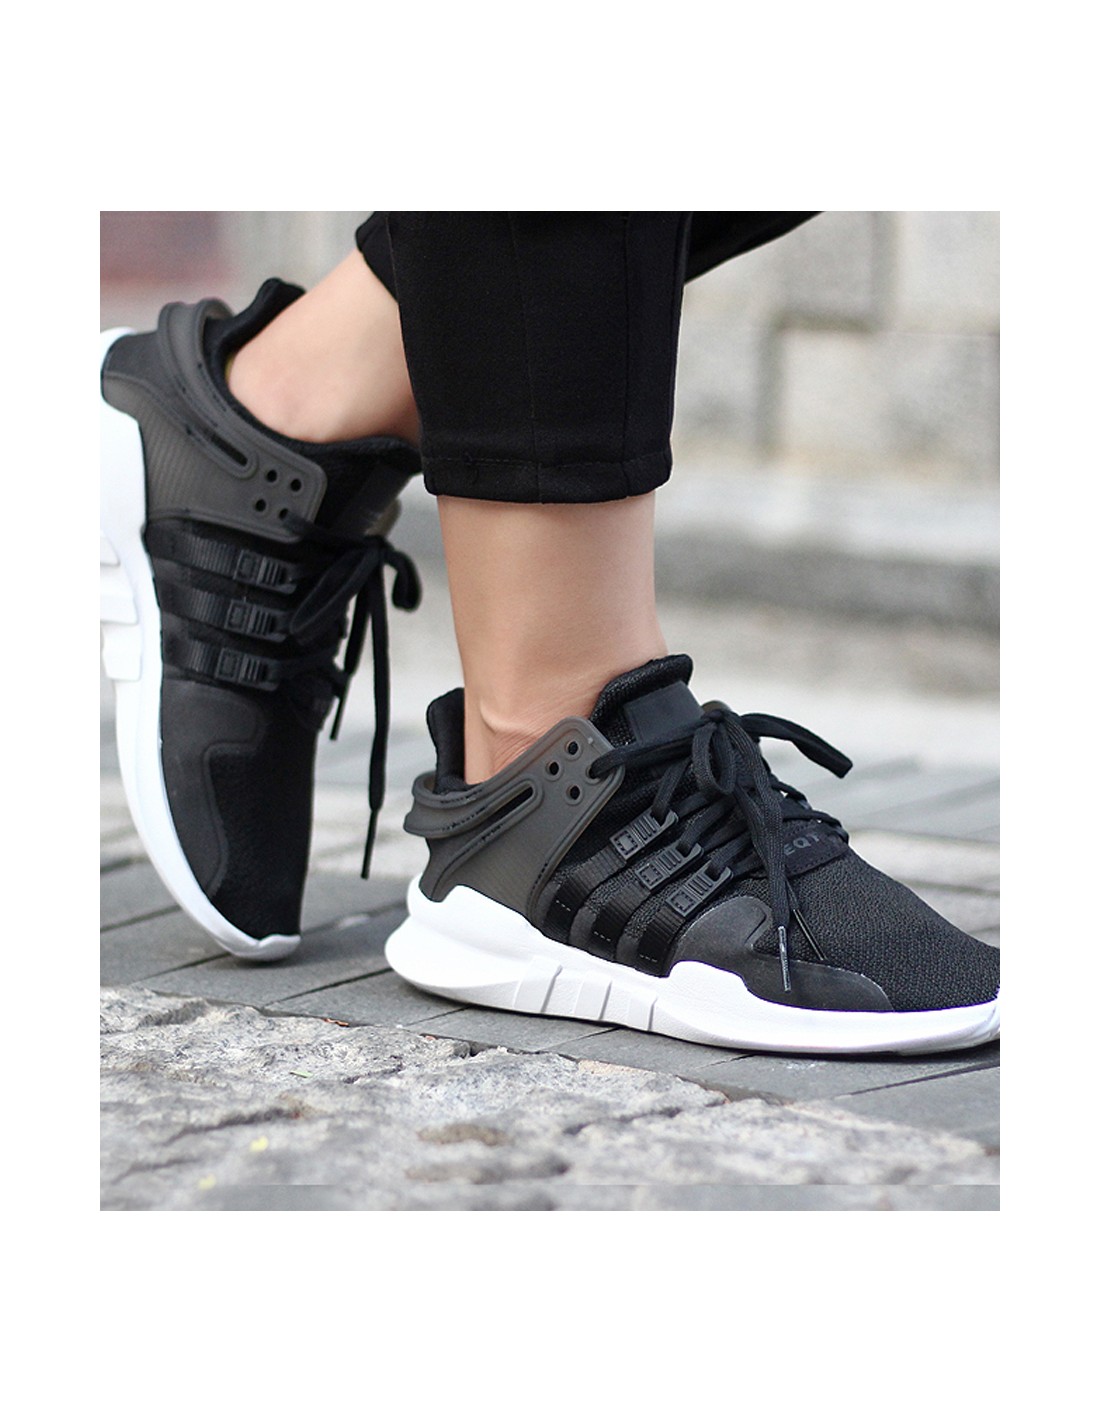 adidas cp9784 adidas Sale | Deals on Shoes, Clothing \u0026 Accessories